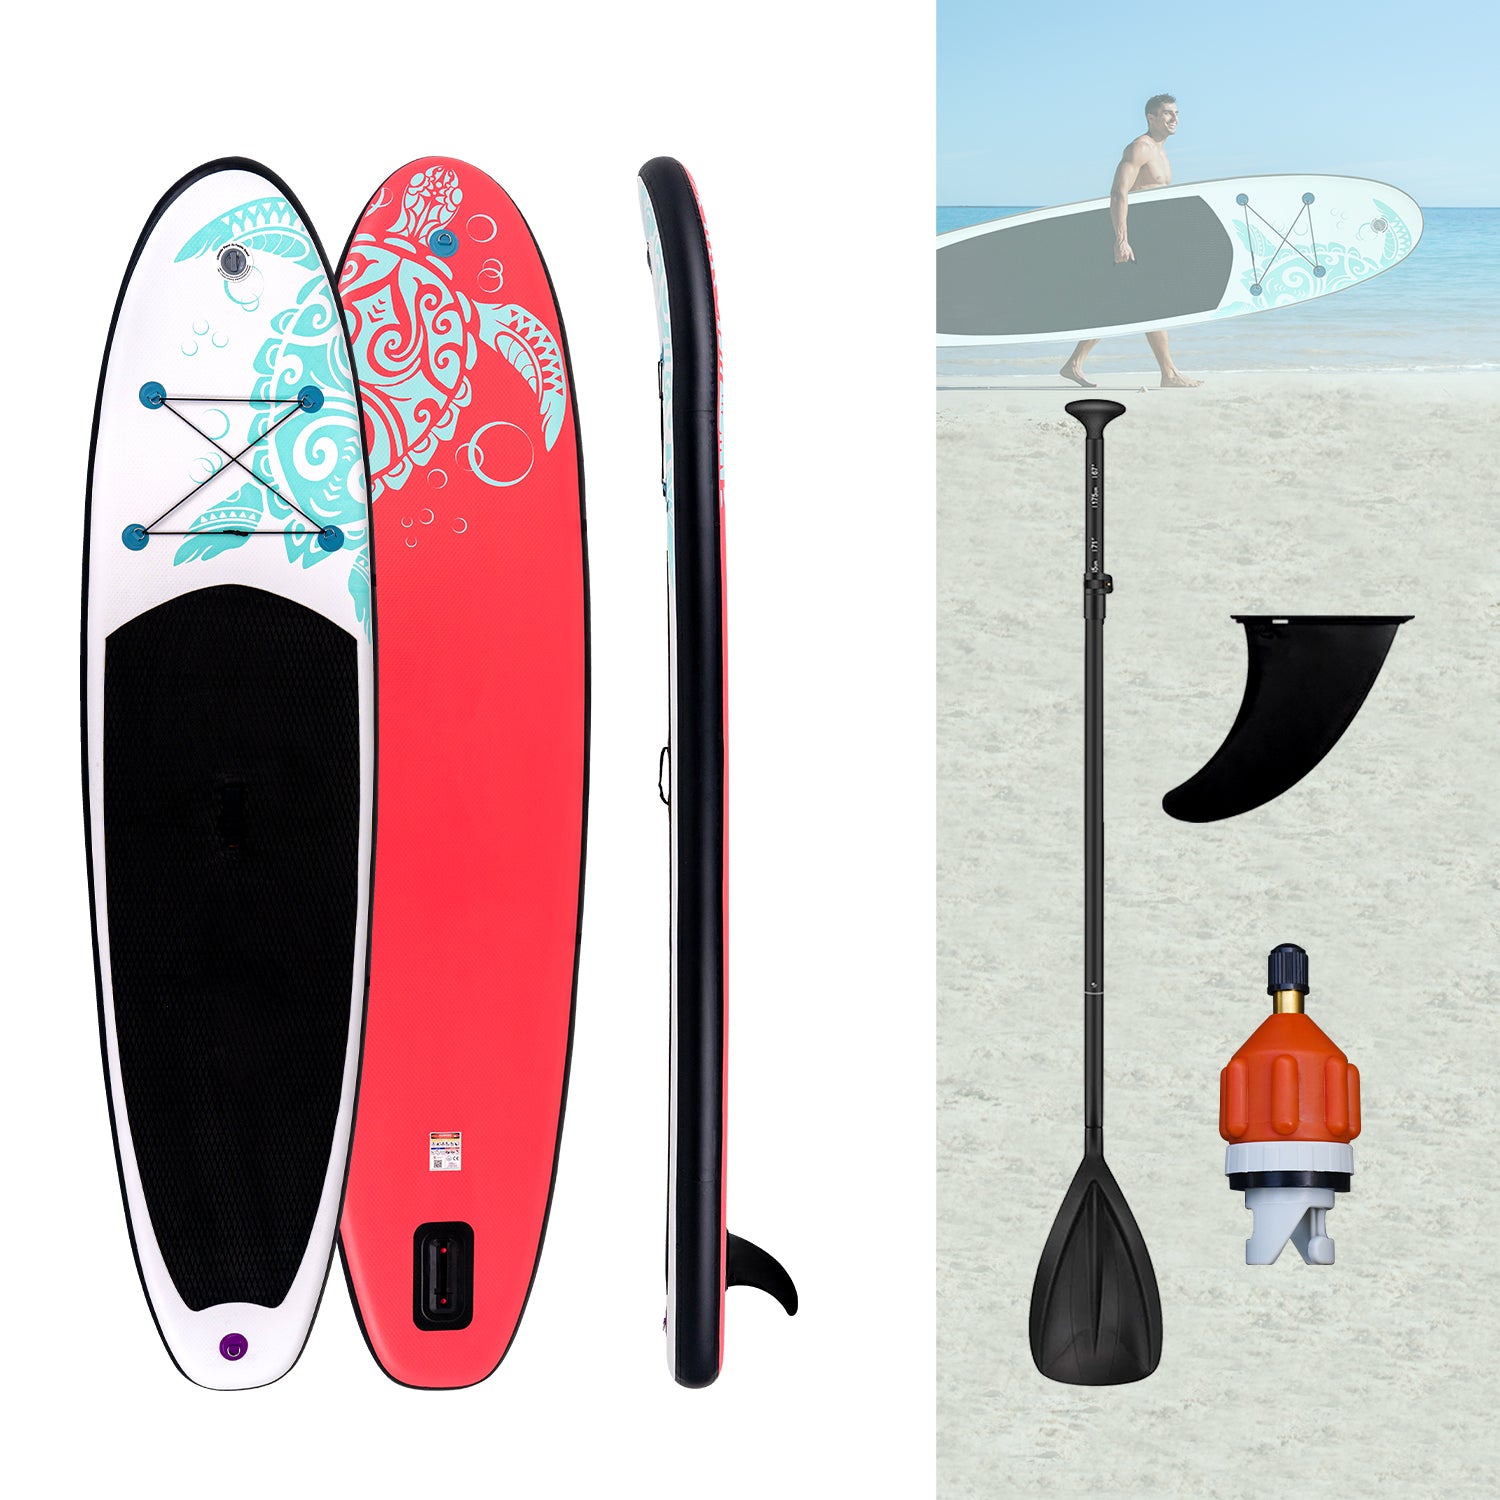 Ultra lightweight stand up paddle board with necessary accessories